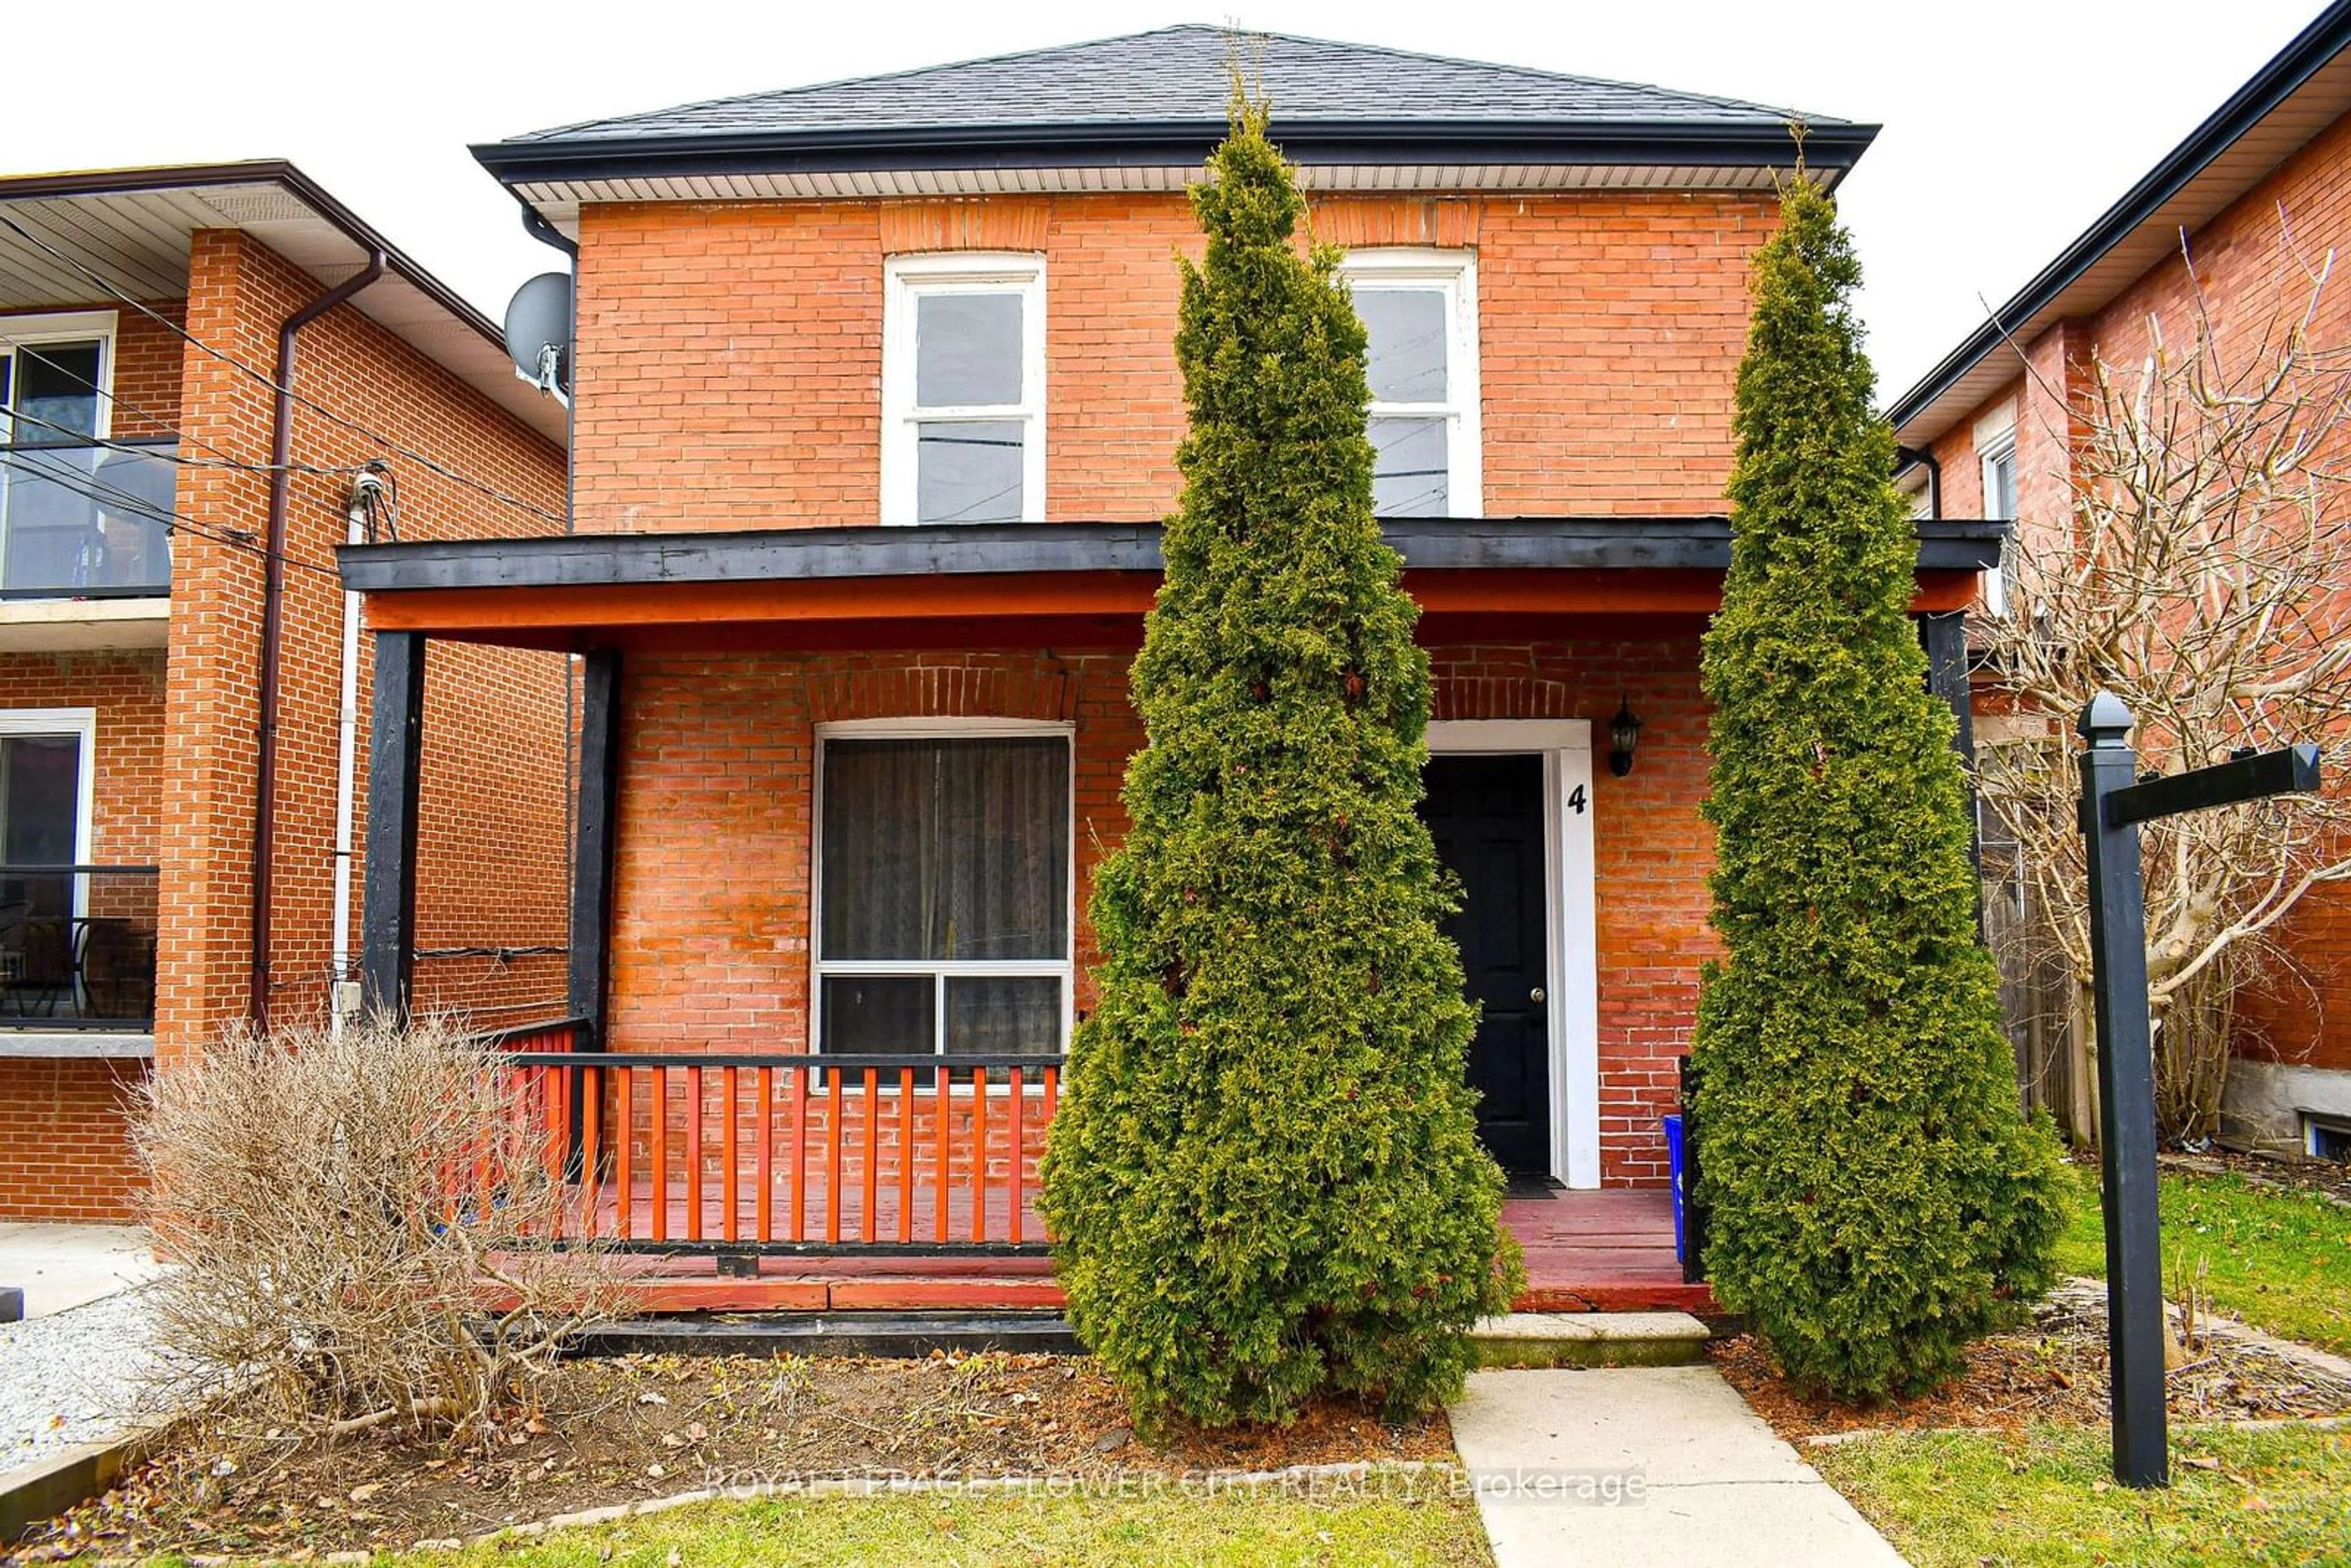 Home with brick exterior material for 4 Main St, Halton Hills Ontario L7G 3G5